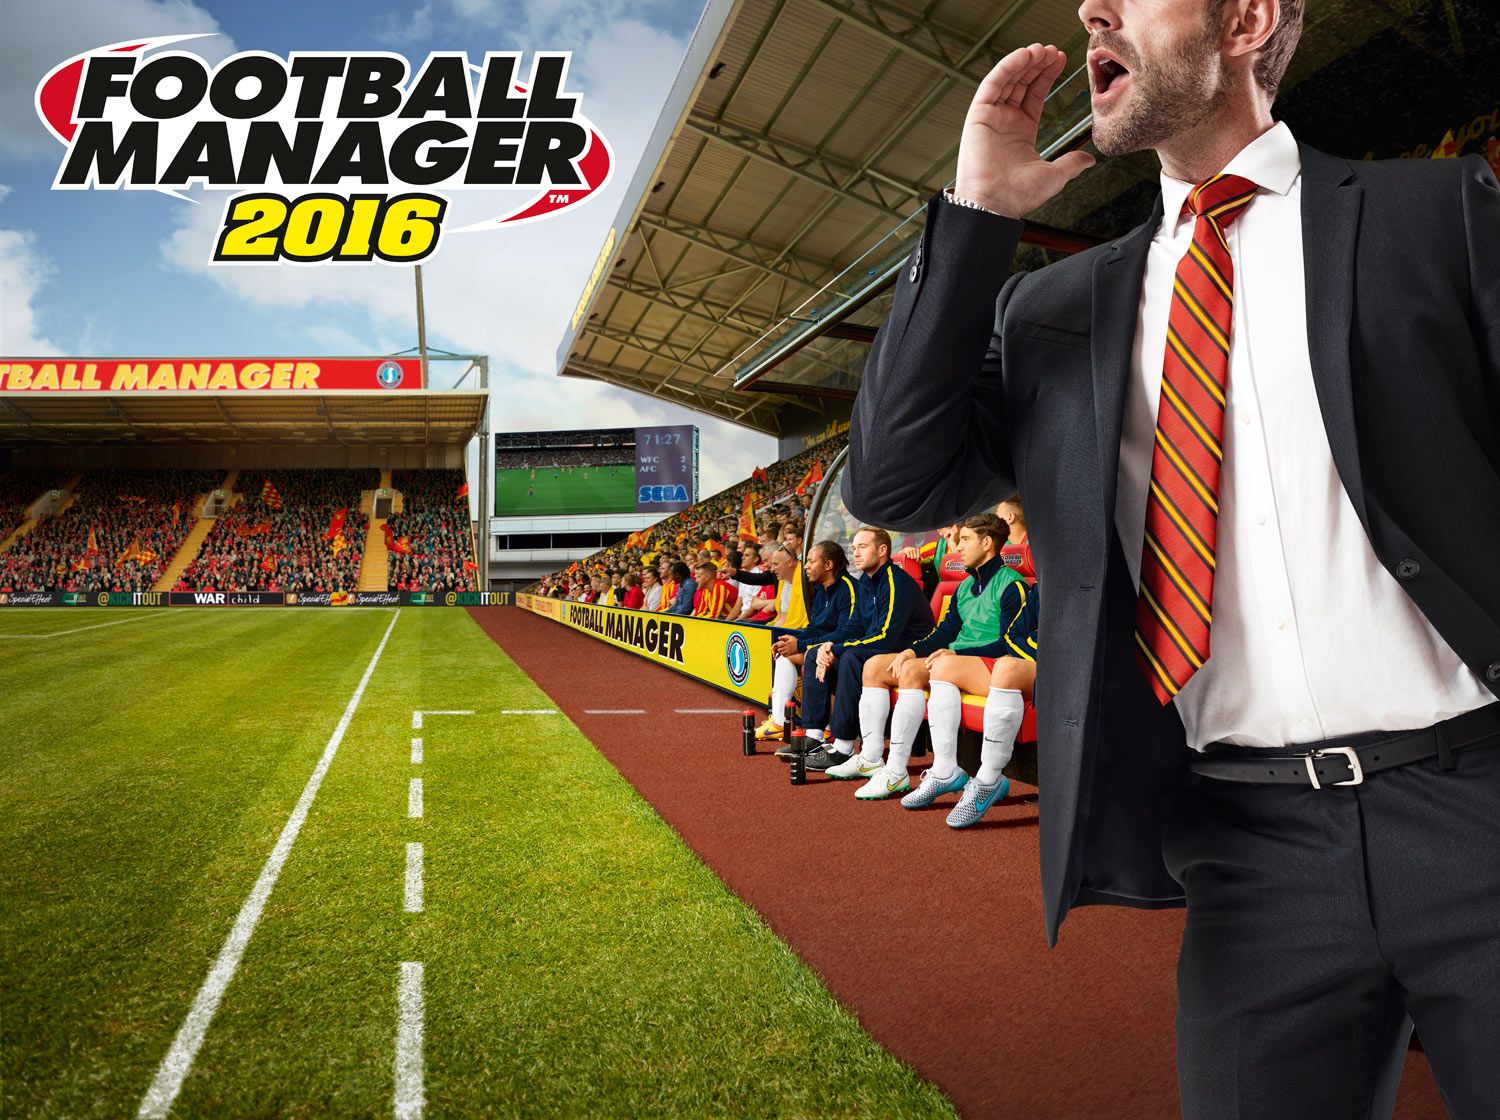 6 Football Manager Lessons We All Need To Learn From Real Football Managers